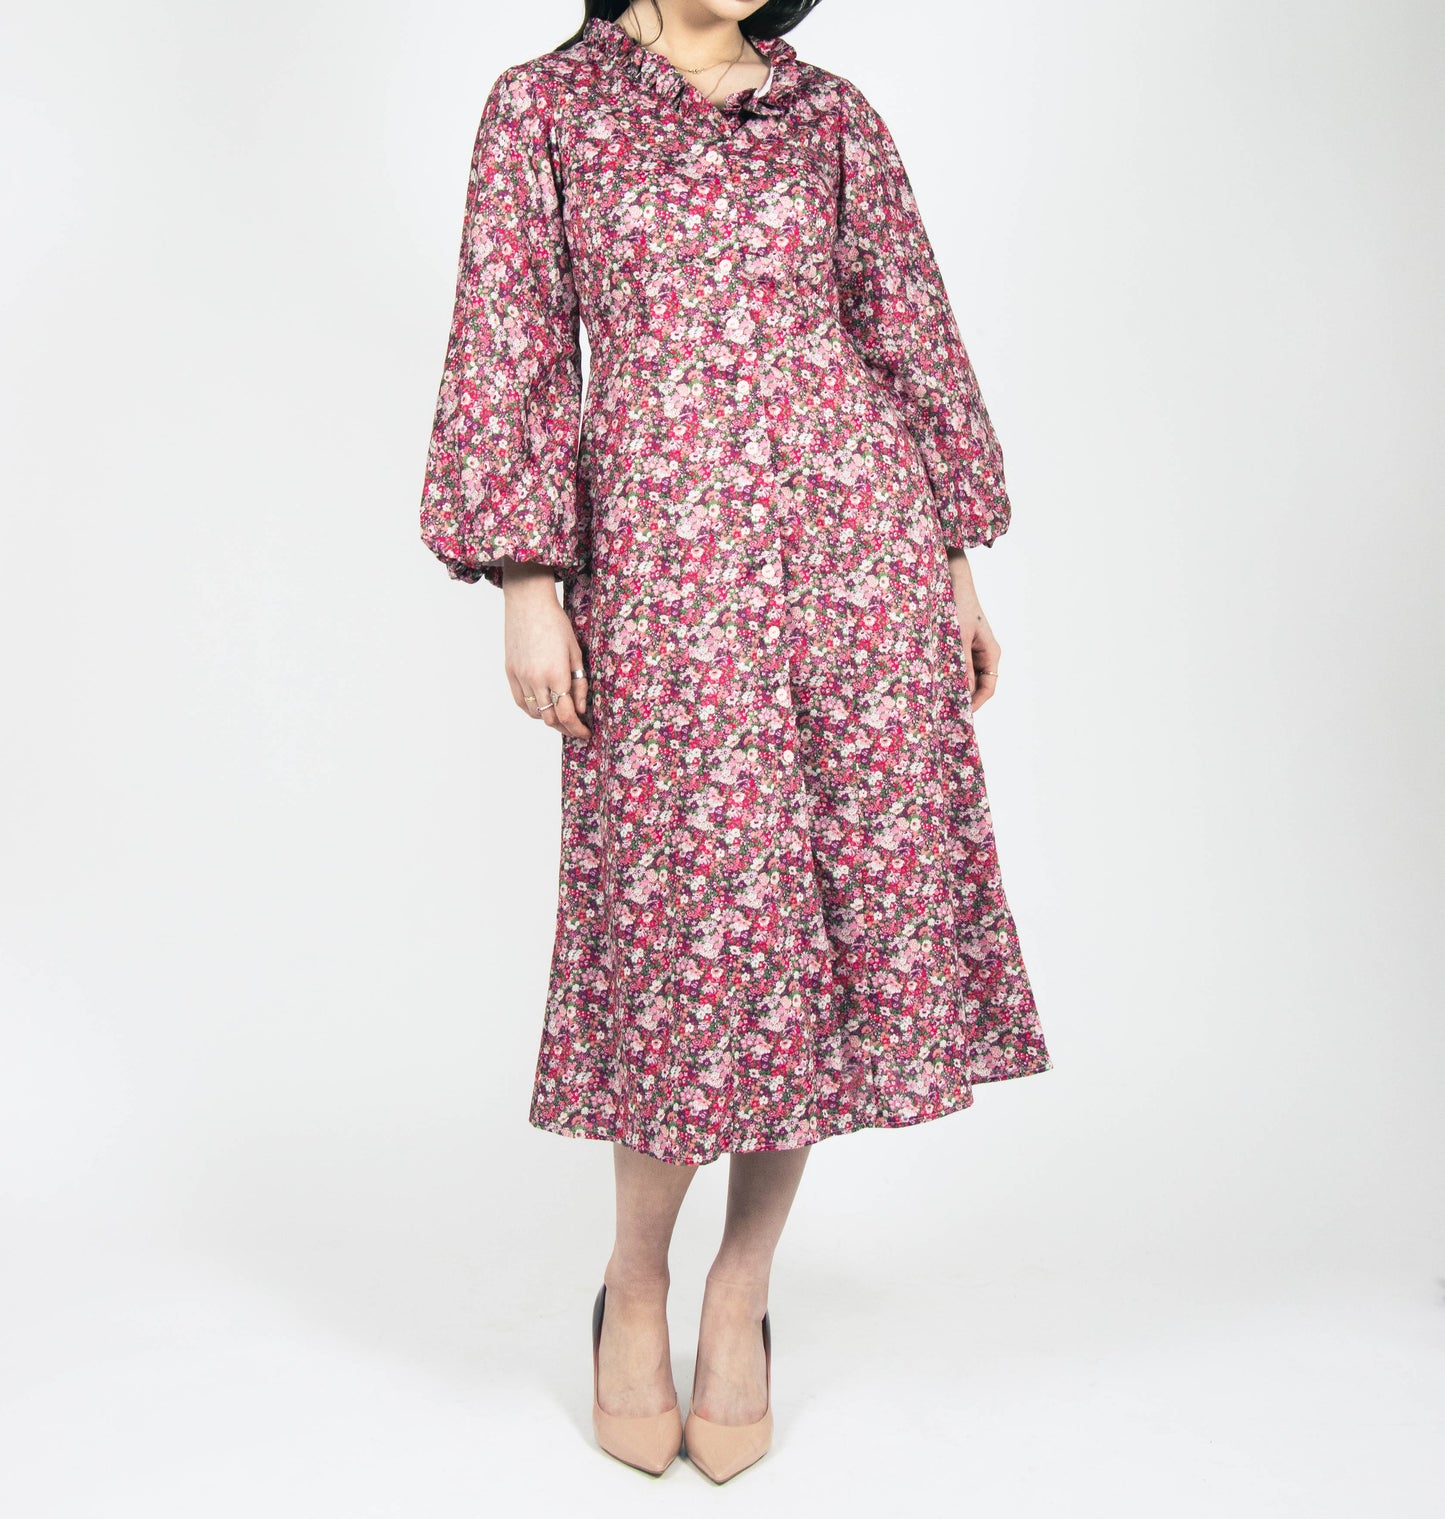 pink and purple ditsy floral midi dress fully lined cotton printed liberty london bubble sleeves and ruffle collar made in ireland fashion womens occasion wear 